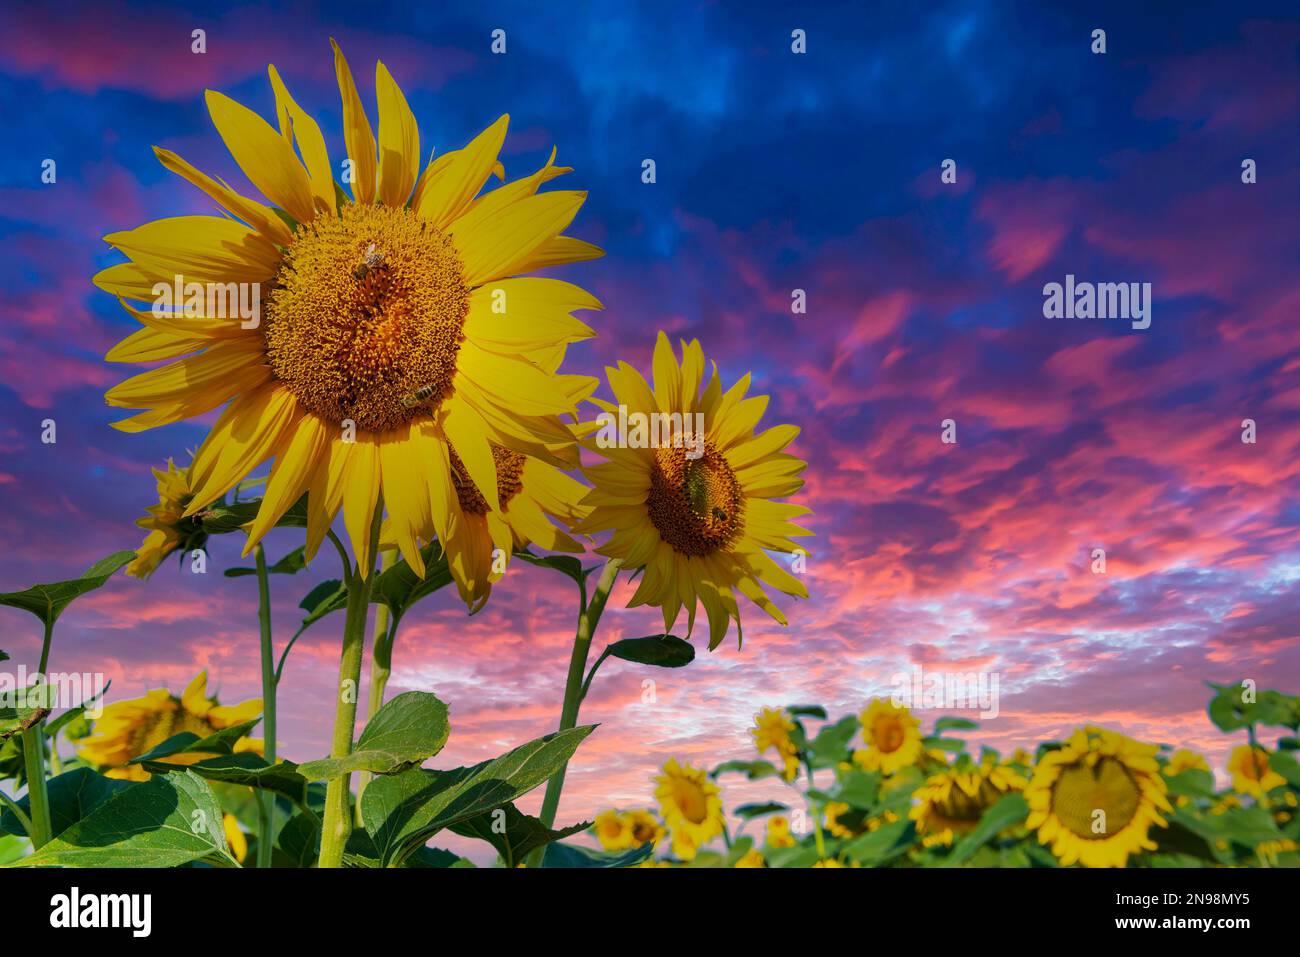 Colorful sunflowers and vibrant sunset sky. Amazing countryside scene Stock Photo